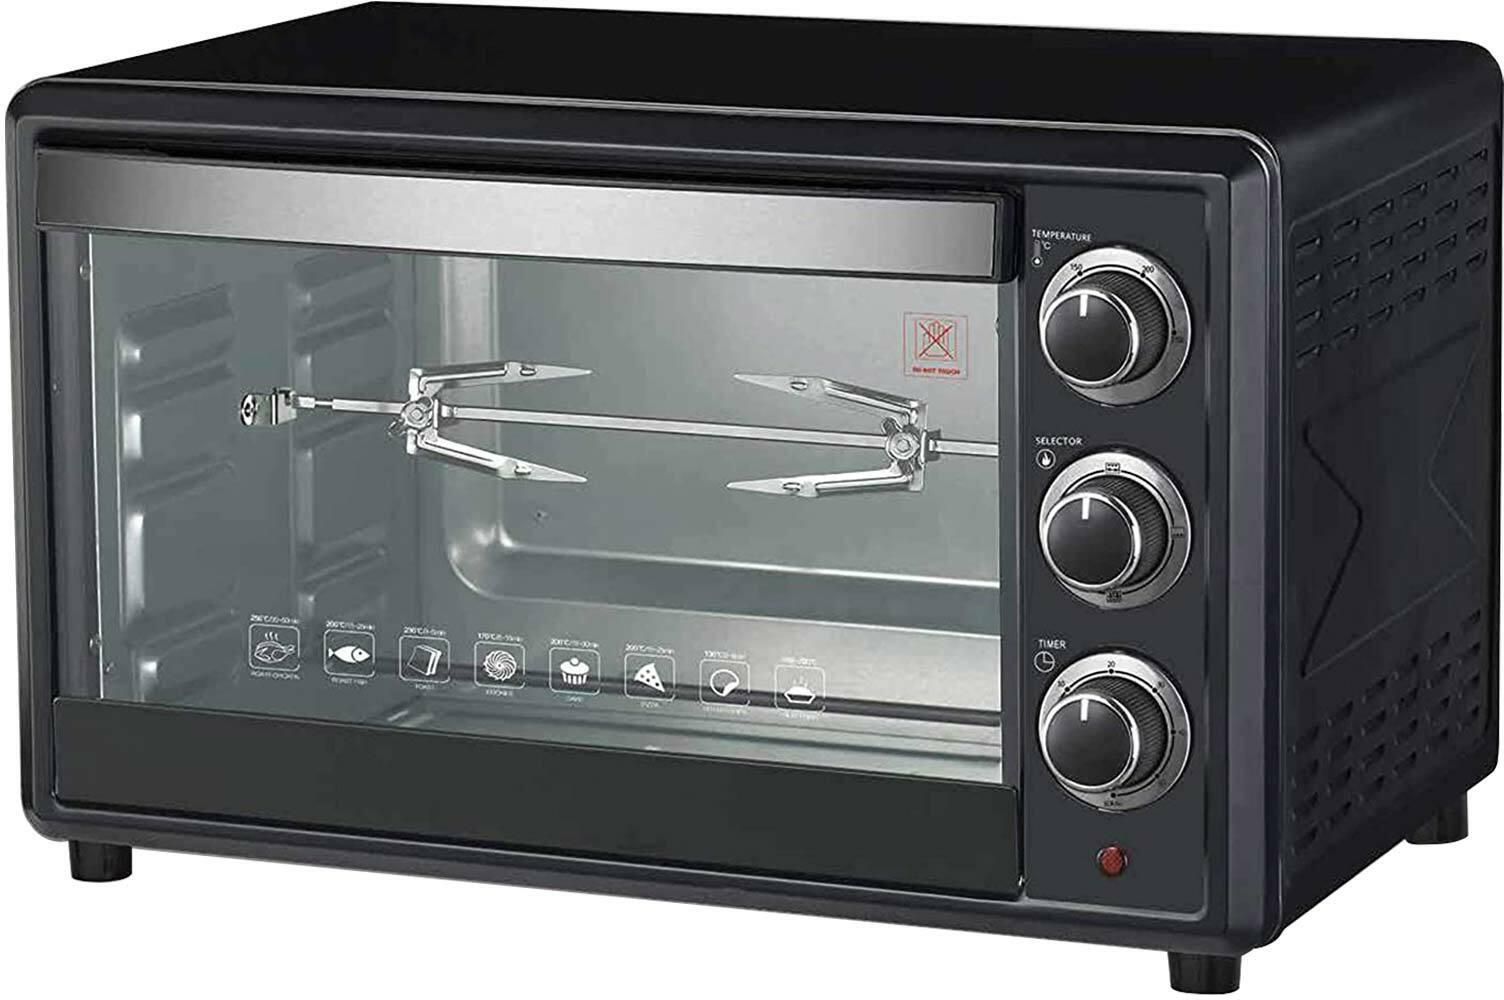 ATC electric oven double glass 45 L - black